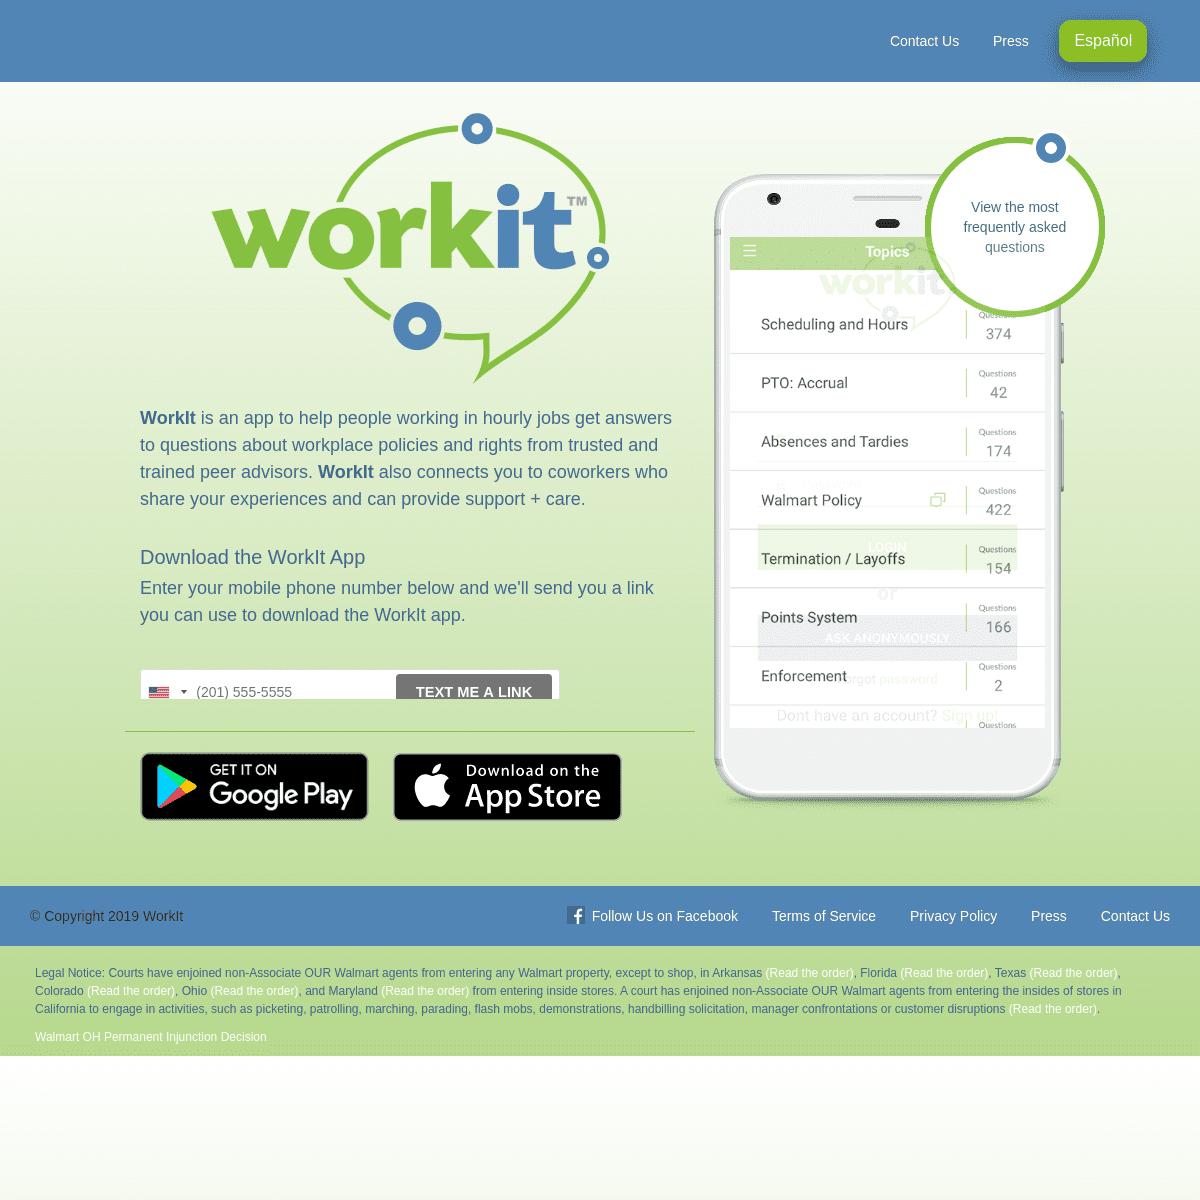 A complete backup of workitapp.org